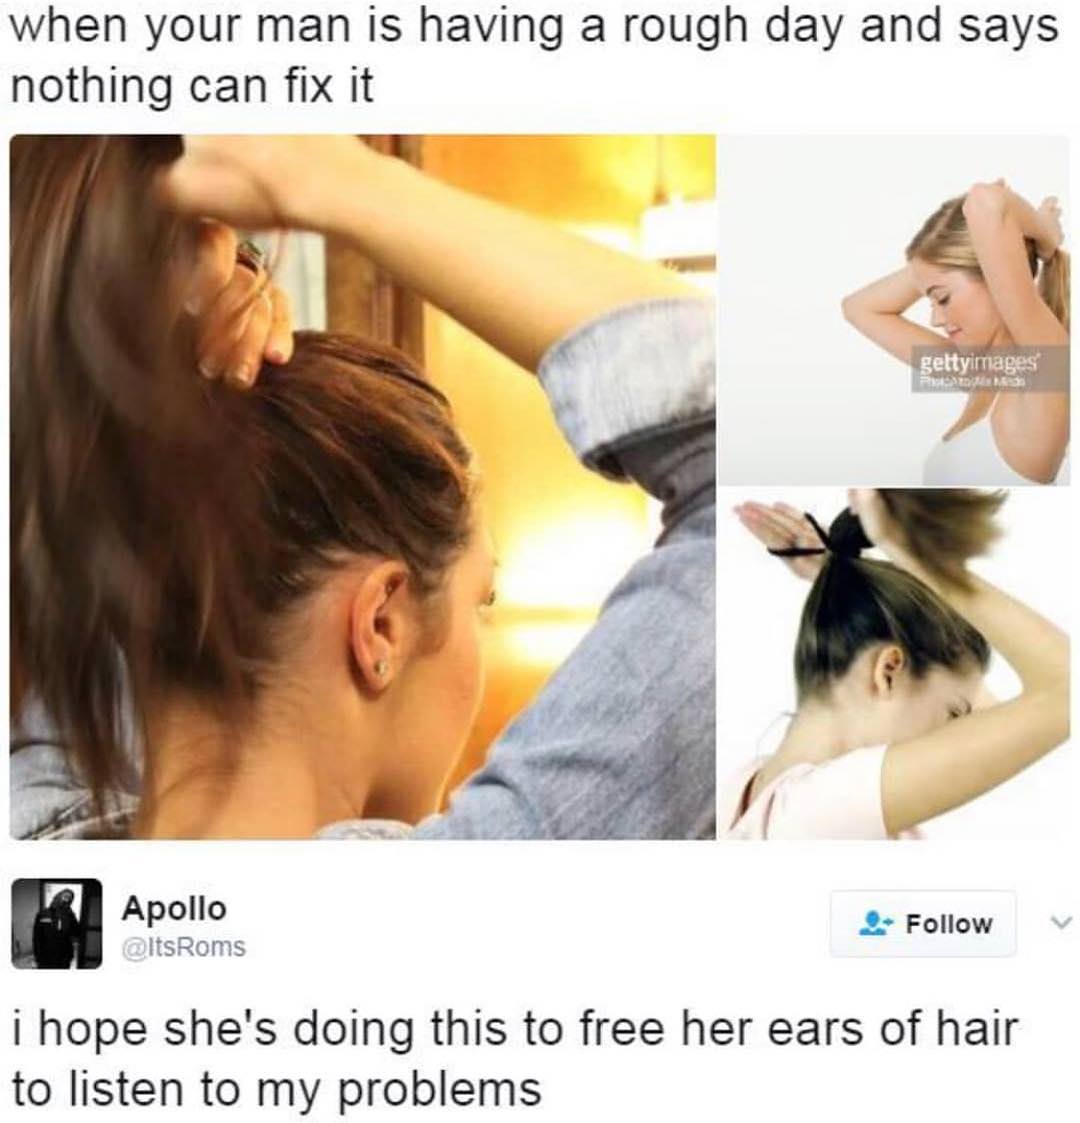 sex is cool but memes - when your man is having a rough day and says nothing can fix it gettyimages Apollo i hope she's doing this to free her ears of hair to listen to my problems